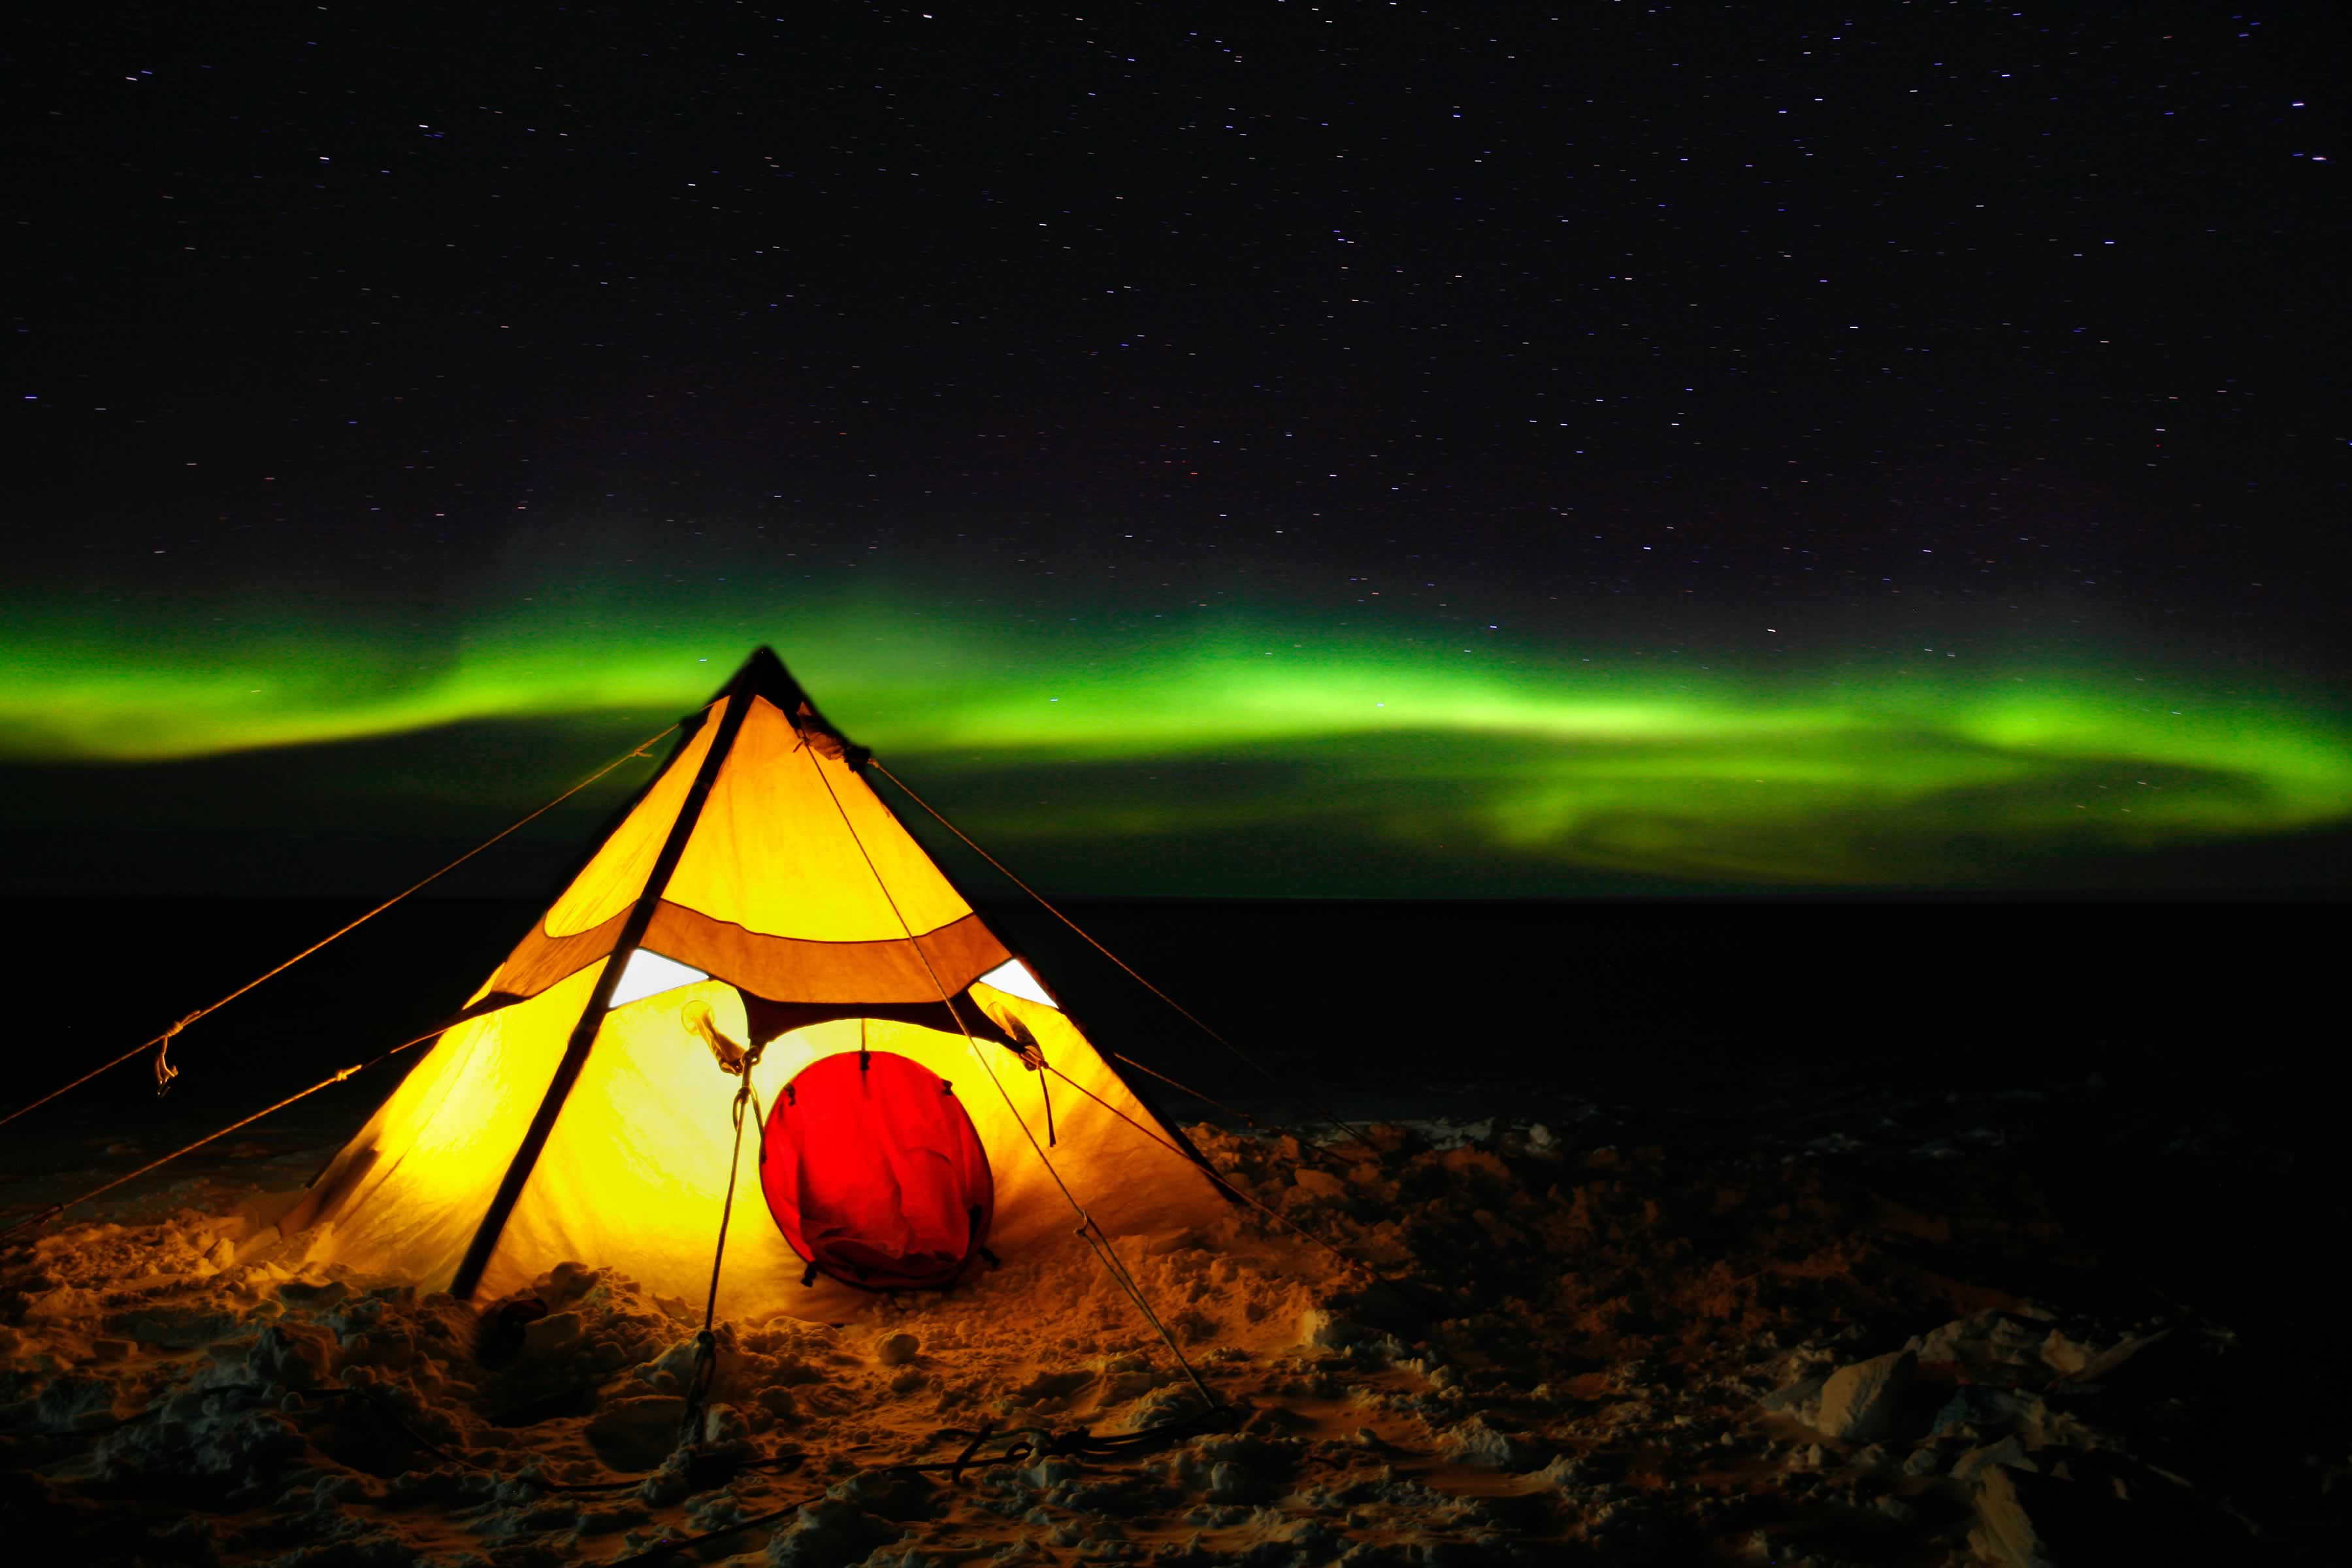 Light from within the tent contrasted against green aurora in the night sky. Photo: Christopher (Chris) Wilson.